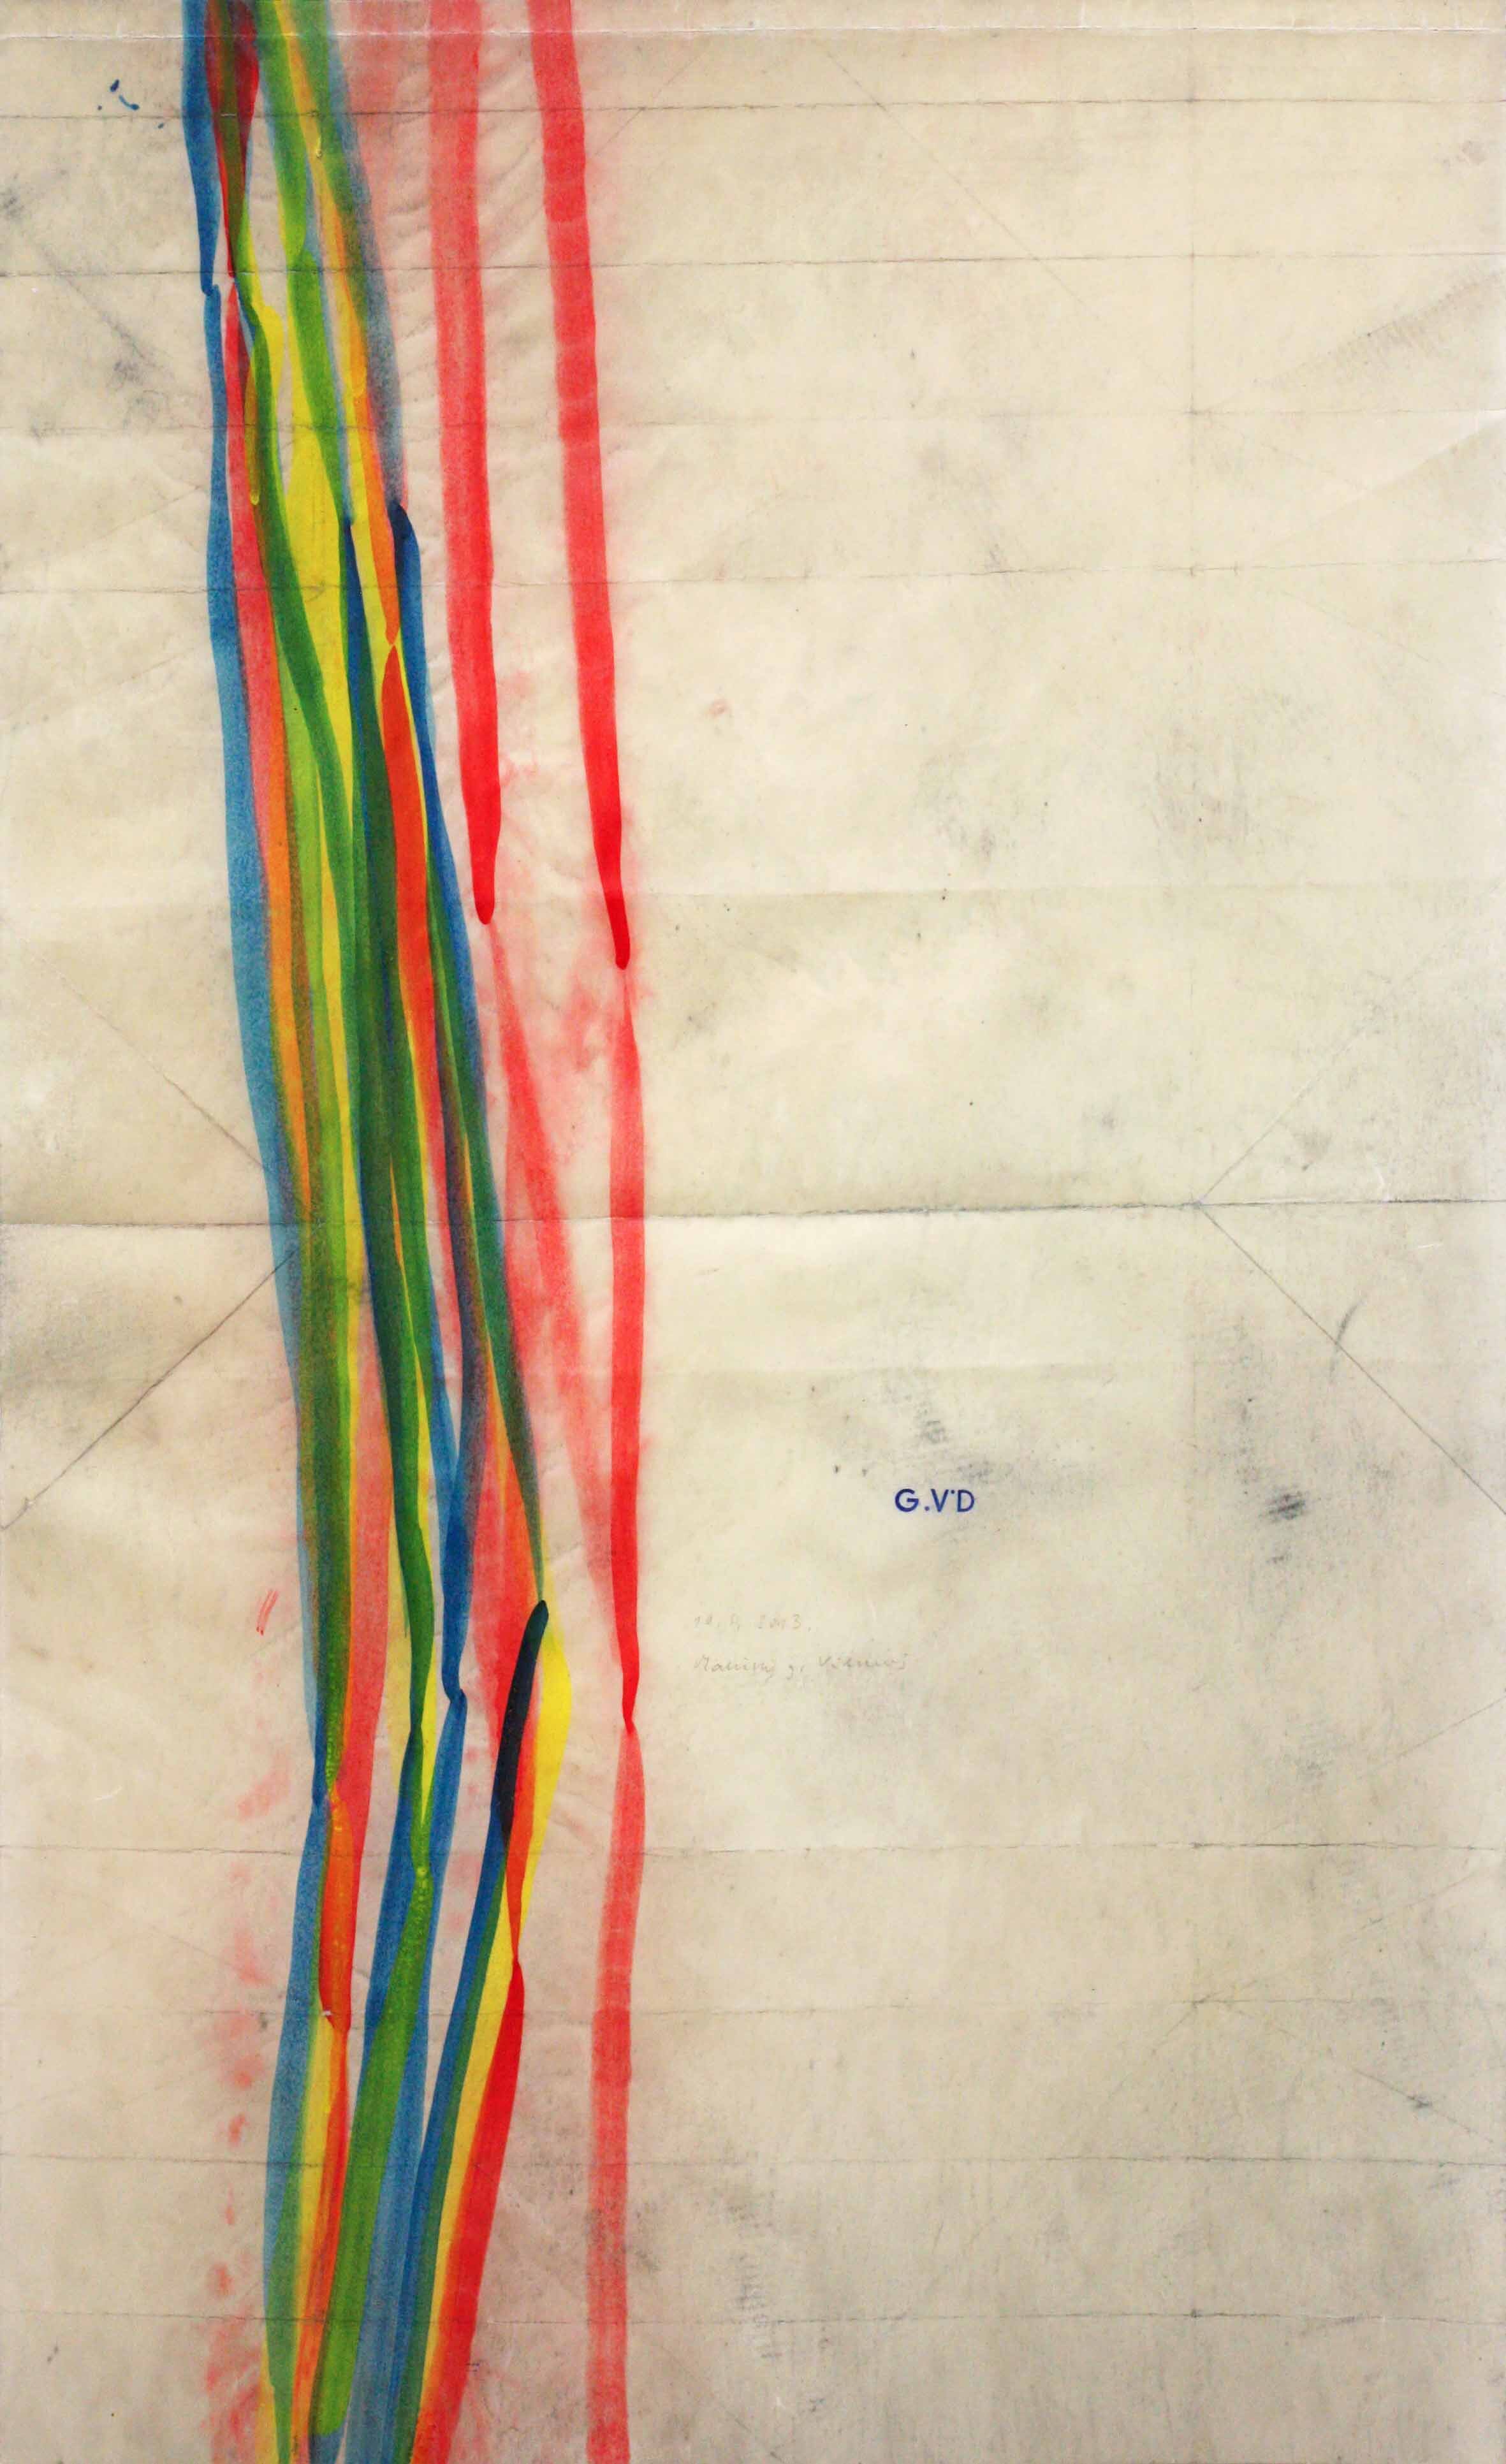  “Stripped”, 90 × 30 cm, Aquarell and Wax on Paper, 2013 